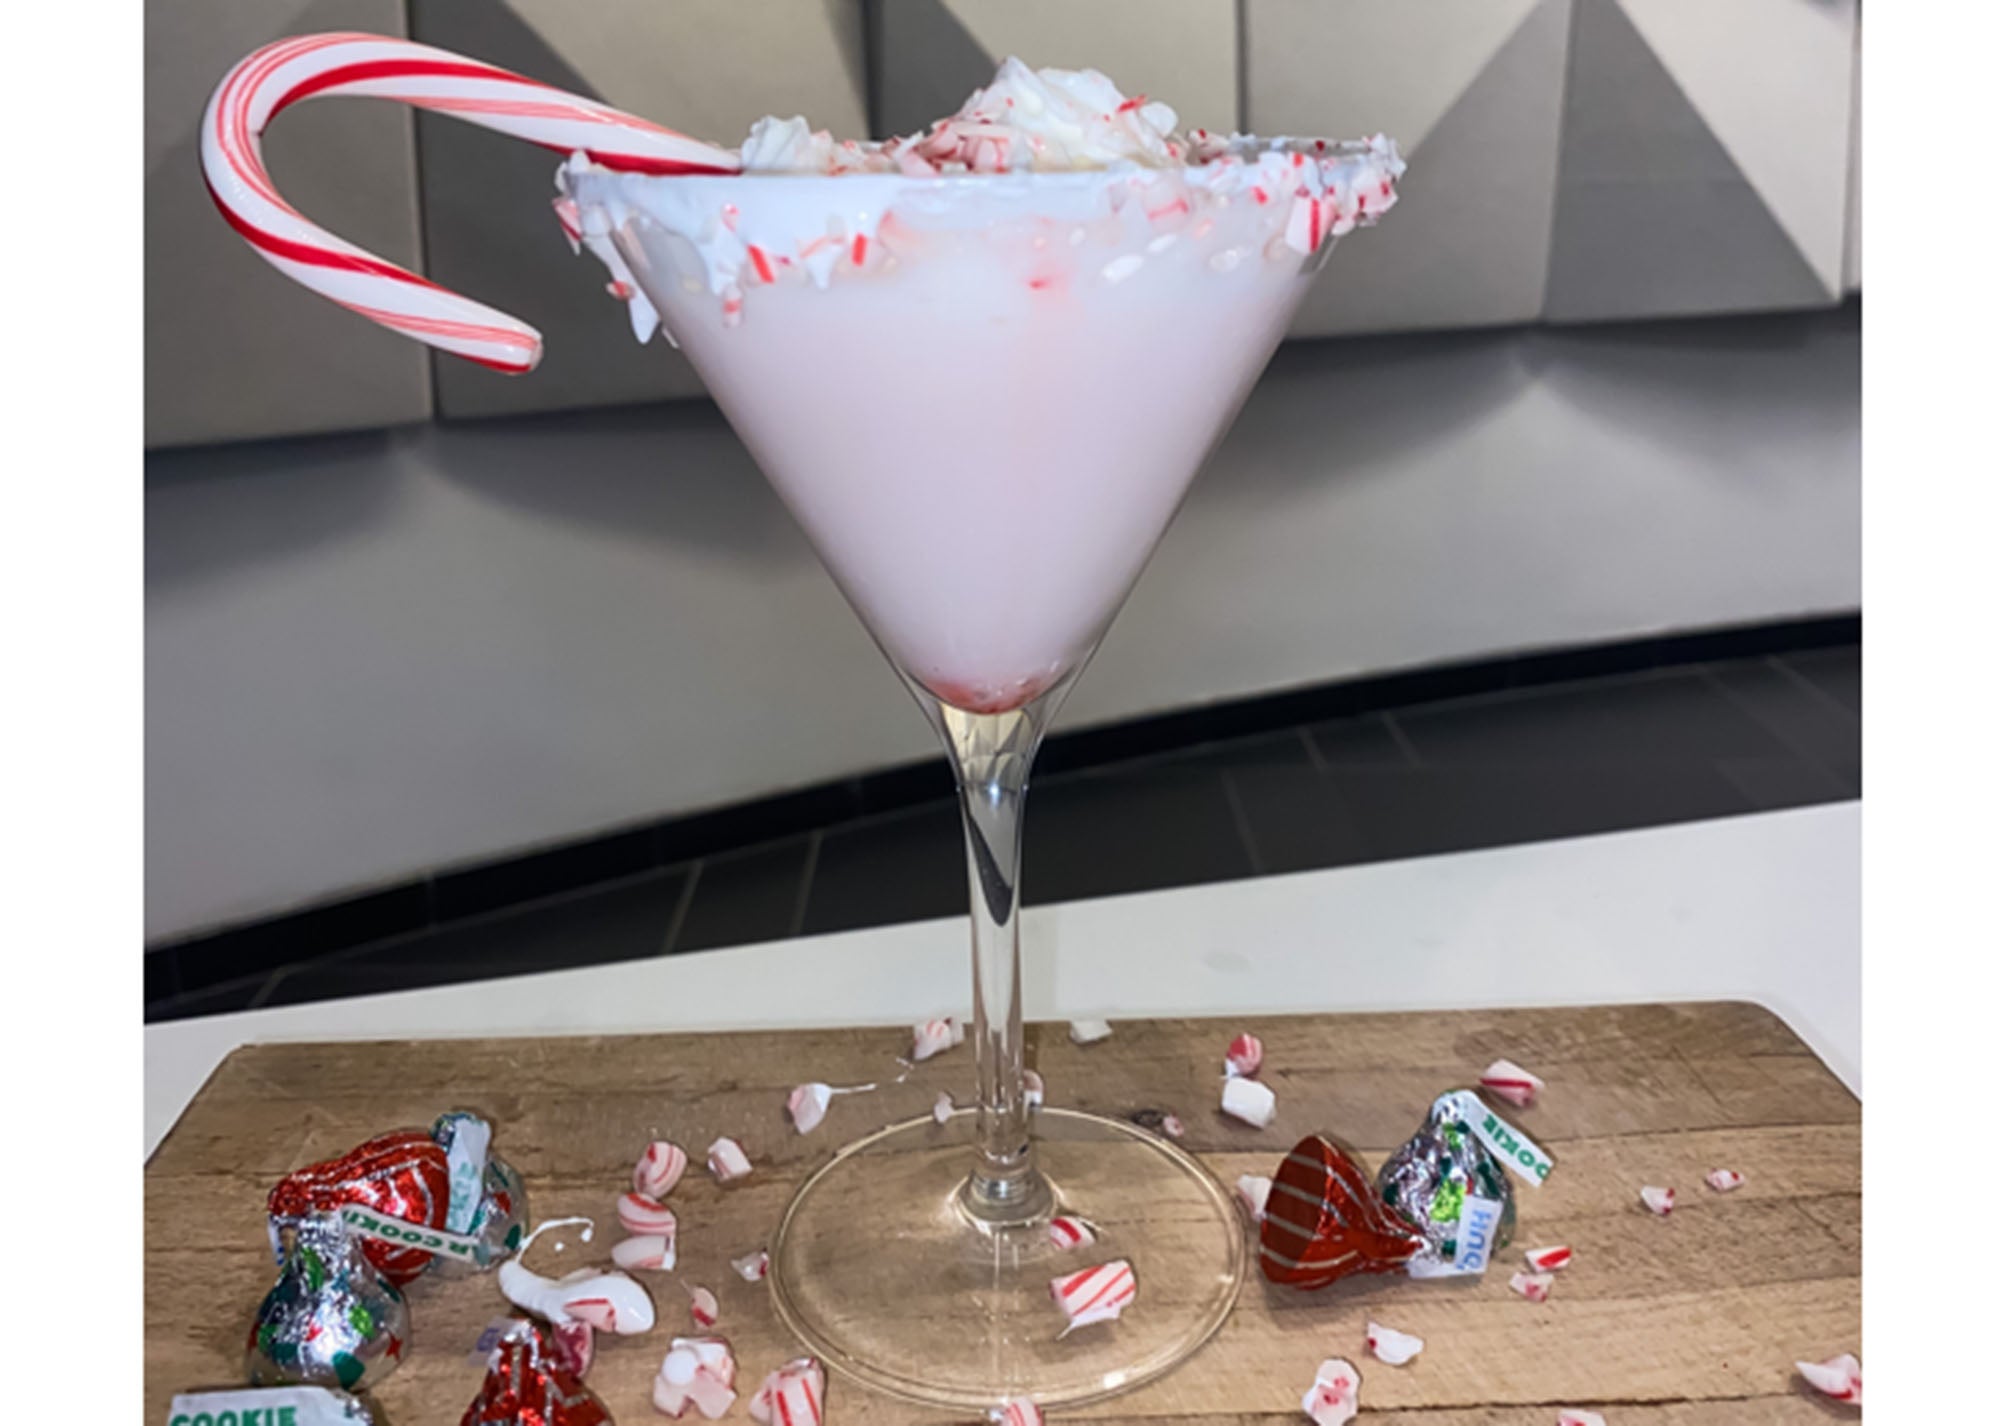 Chocolate Covered Candy Cane Martini at Lobby Bar